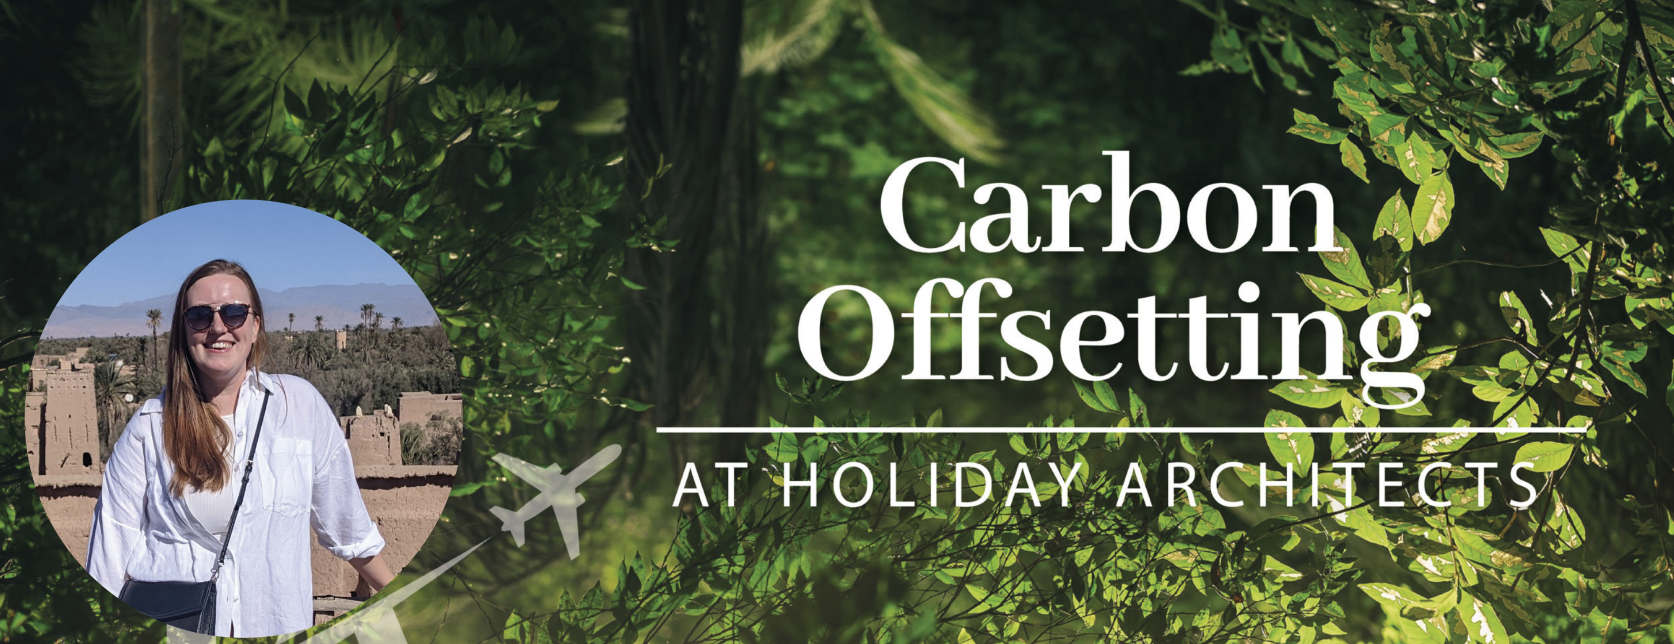 Carbon Offsetting at Holiday Architects